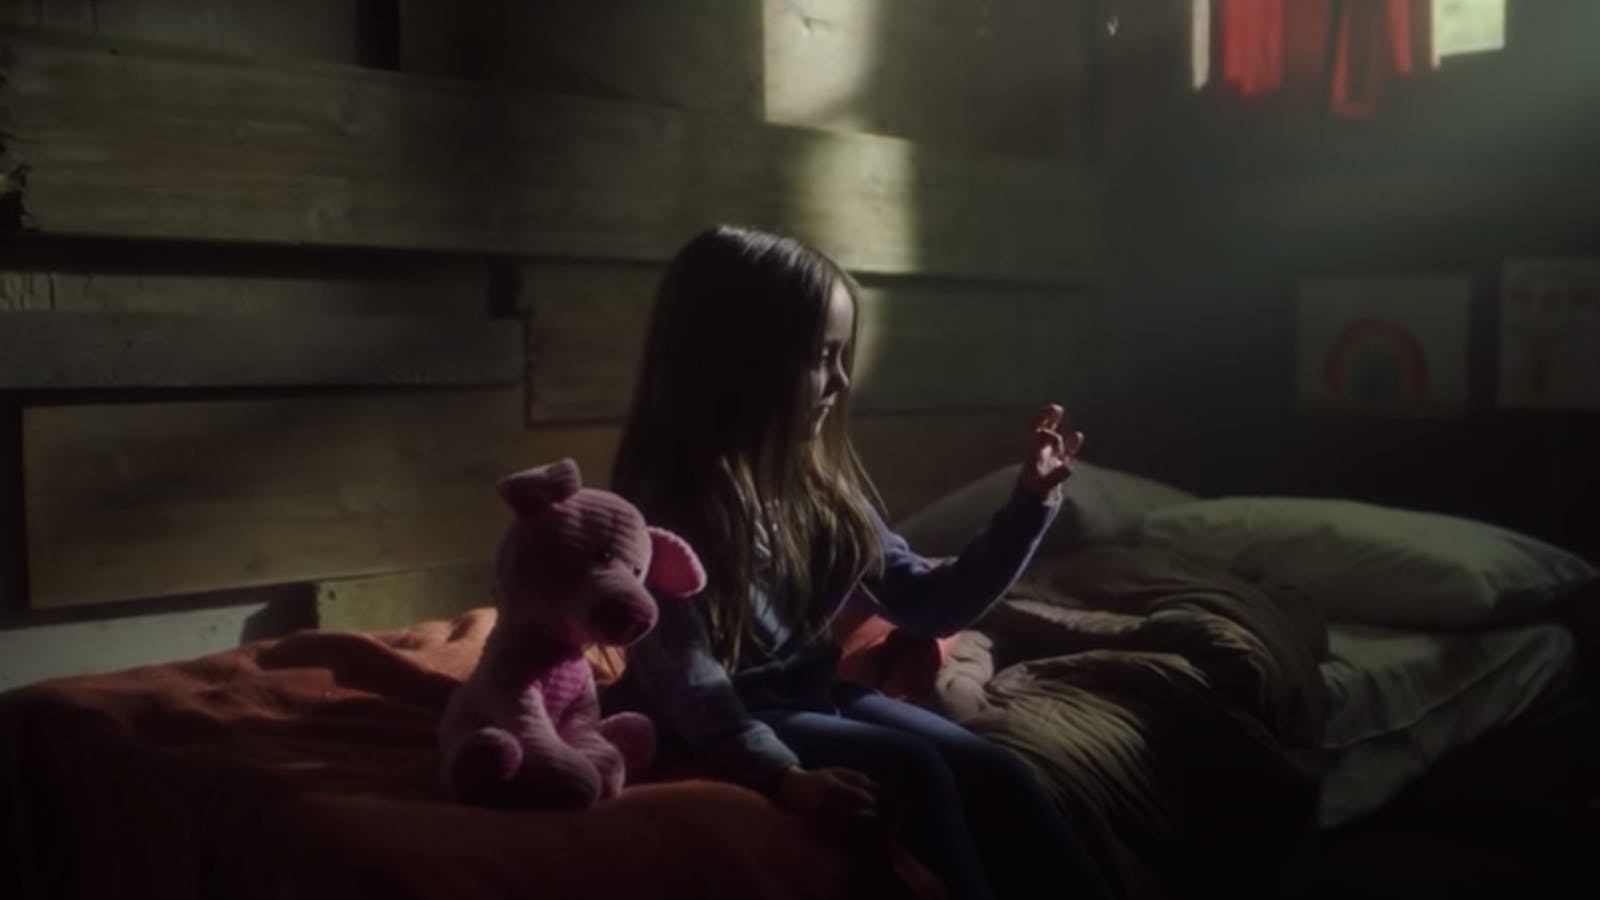 Screengrab of a young girl in a dark room, sitting on her bed next to her stuffed animal.